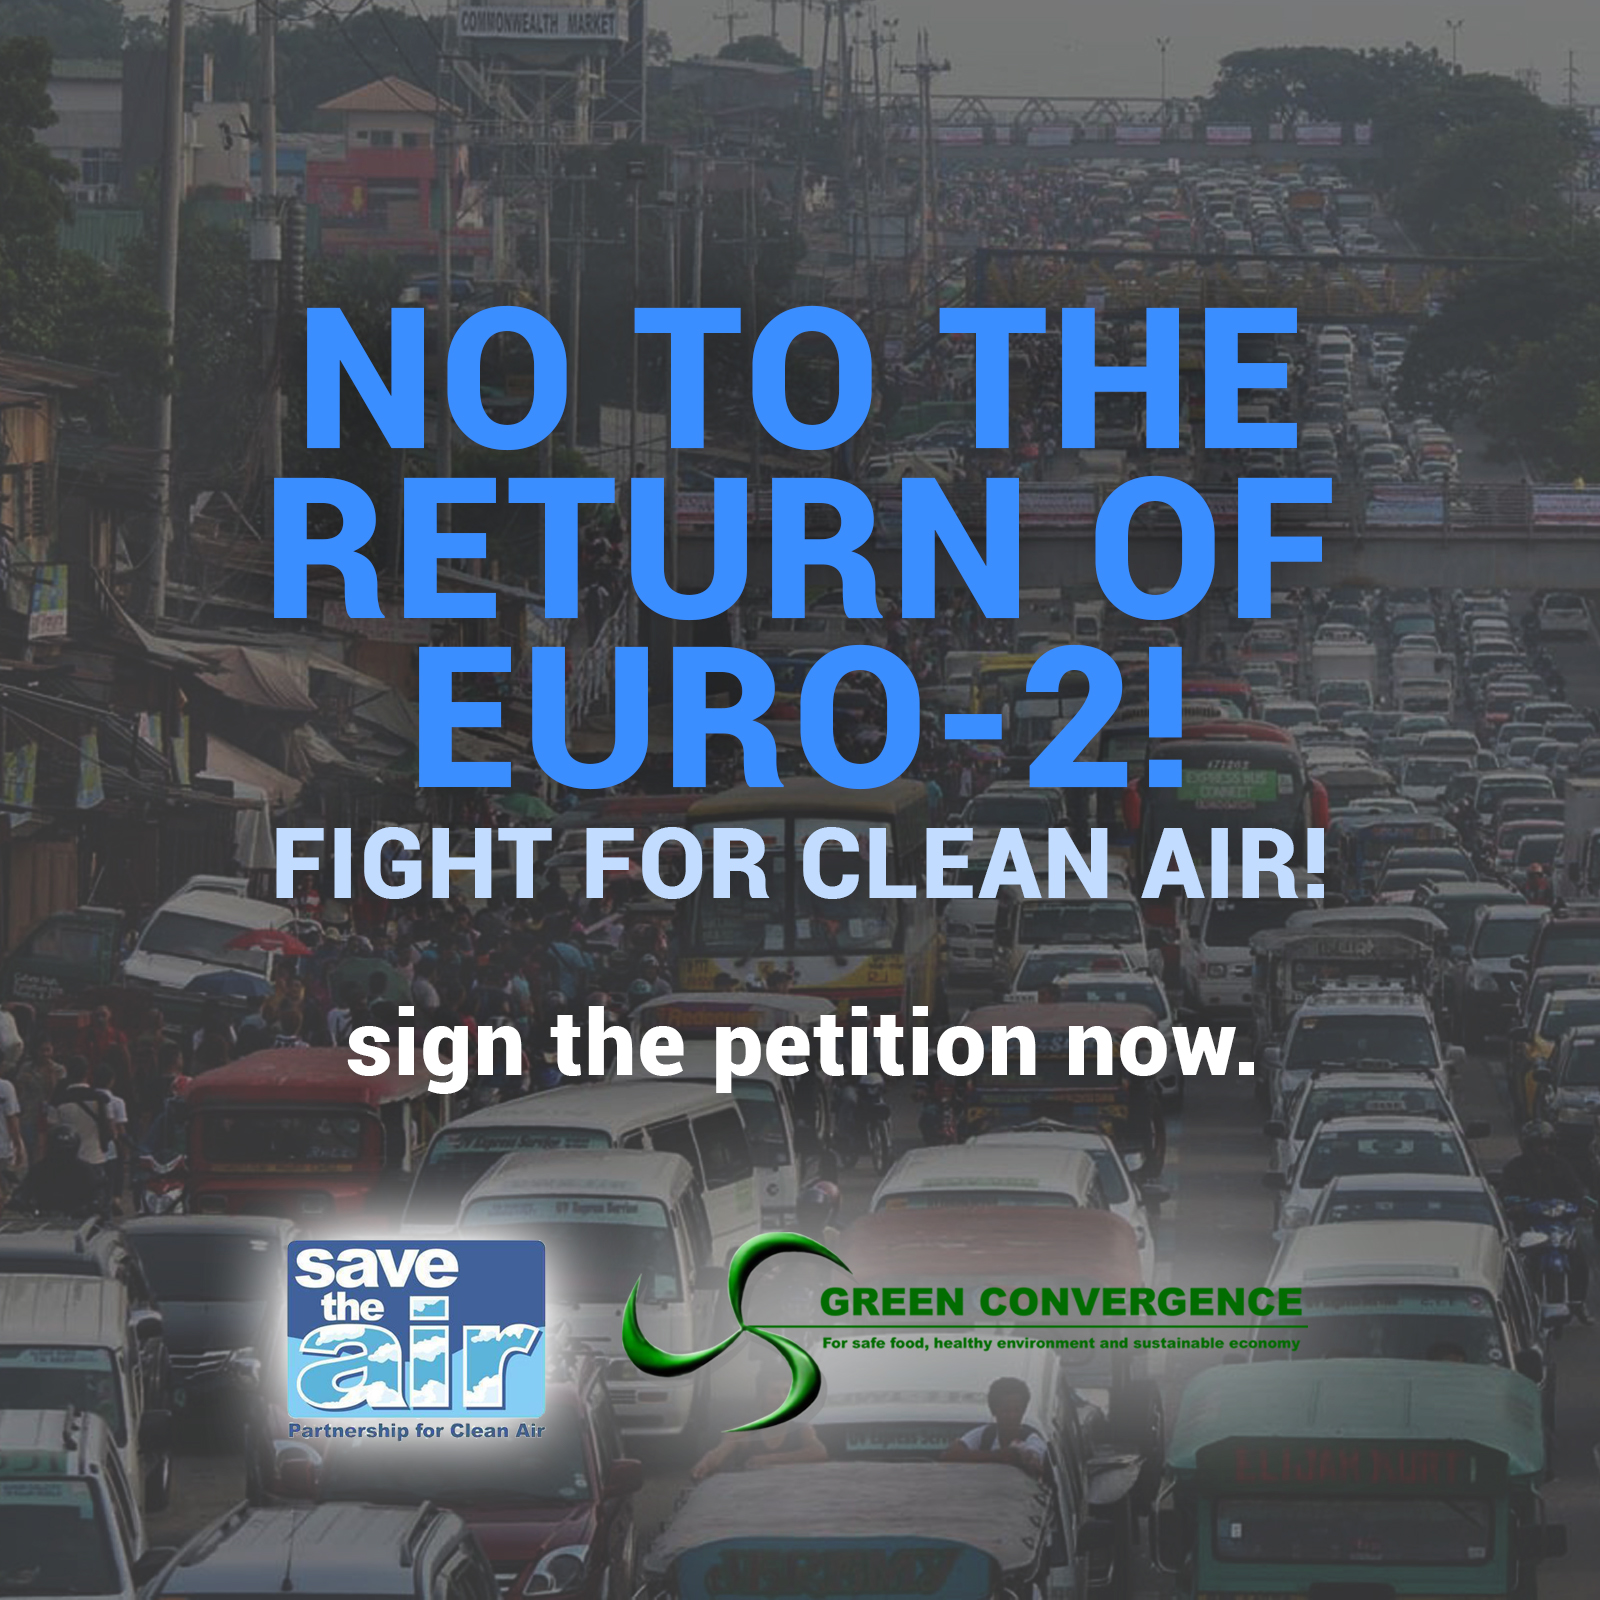 No to the Return of Euro-2 in the Philippines! Sign the Petition Now!